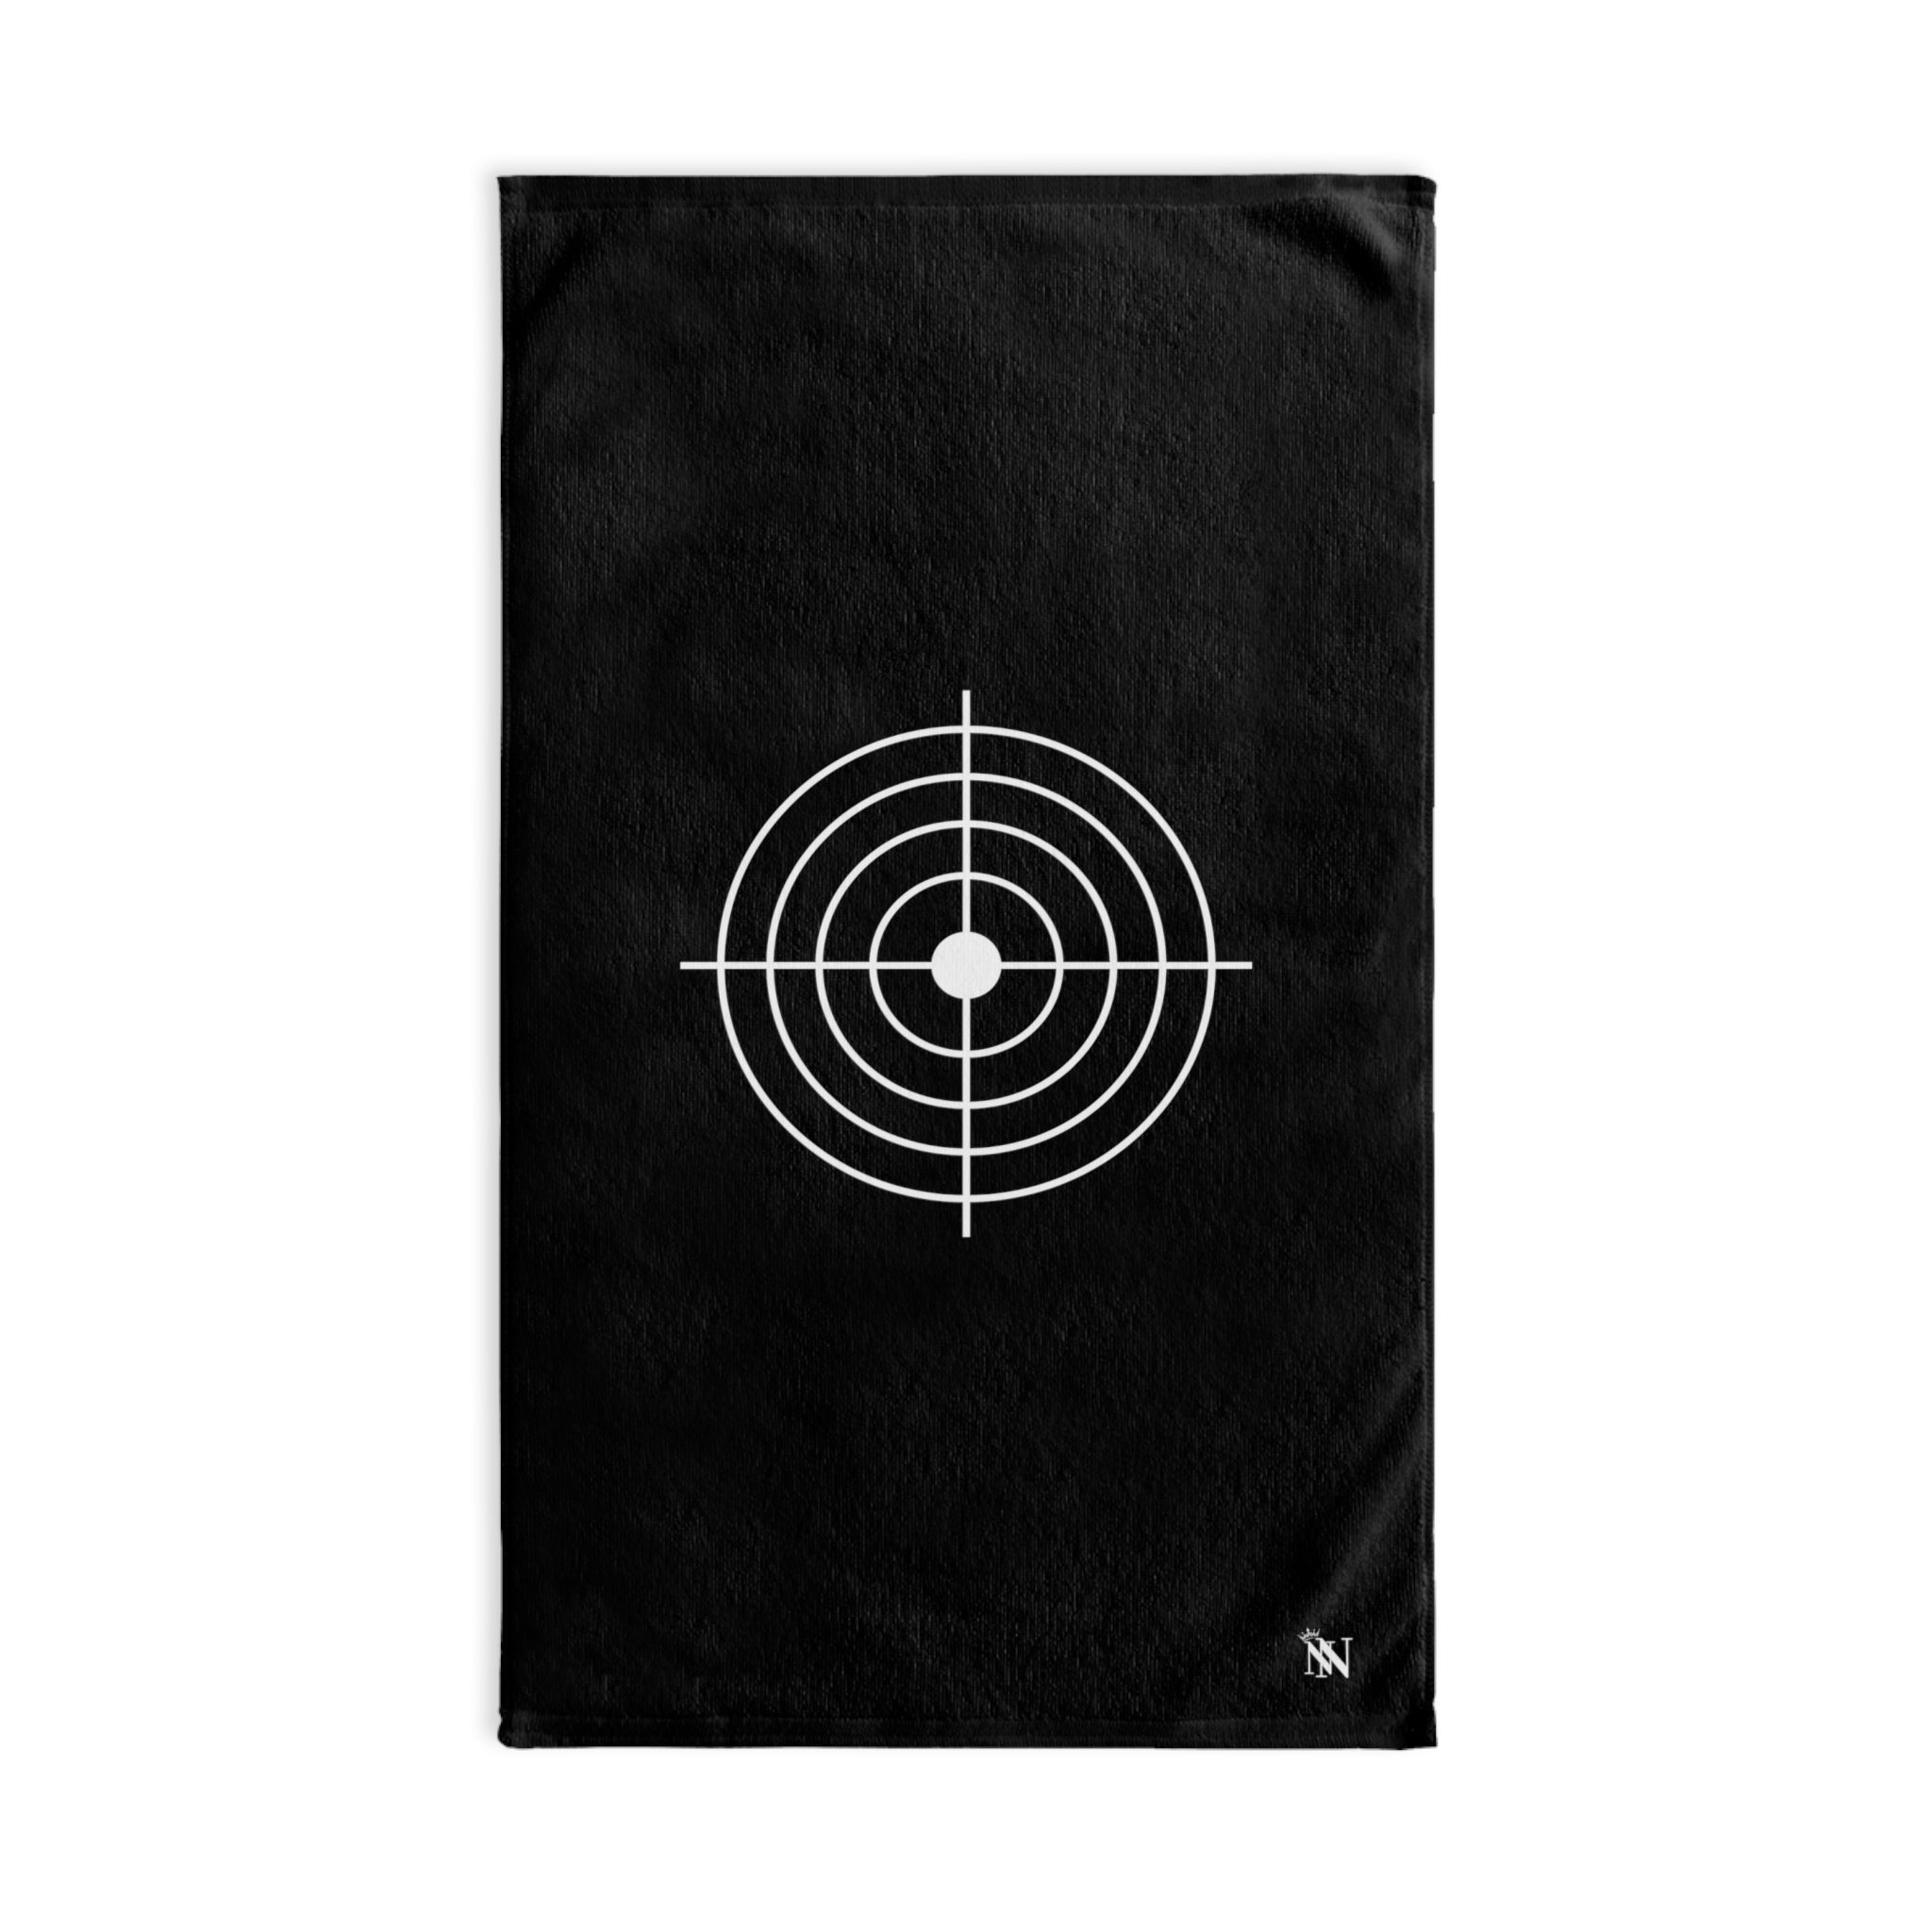 Medium White Crosshairs Black | Sexy Gifts for Boyfriend, Funny Towel Romantic Gift for Wedding Couple Fiance First Year 2nd Anniversary Valentines, Party Gag Gifts, Joke Humor Cloth for Husband Men BF NECTAR NAPKINS